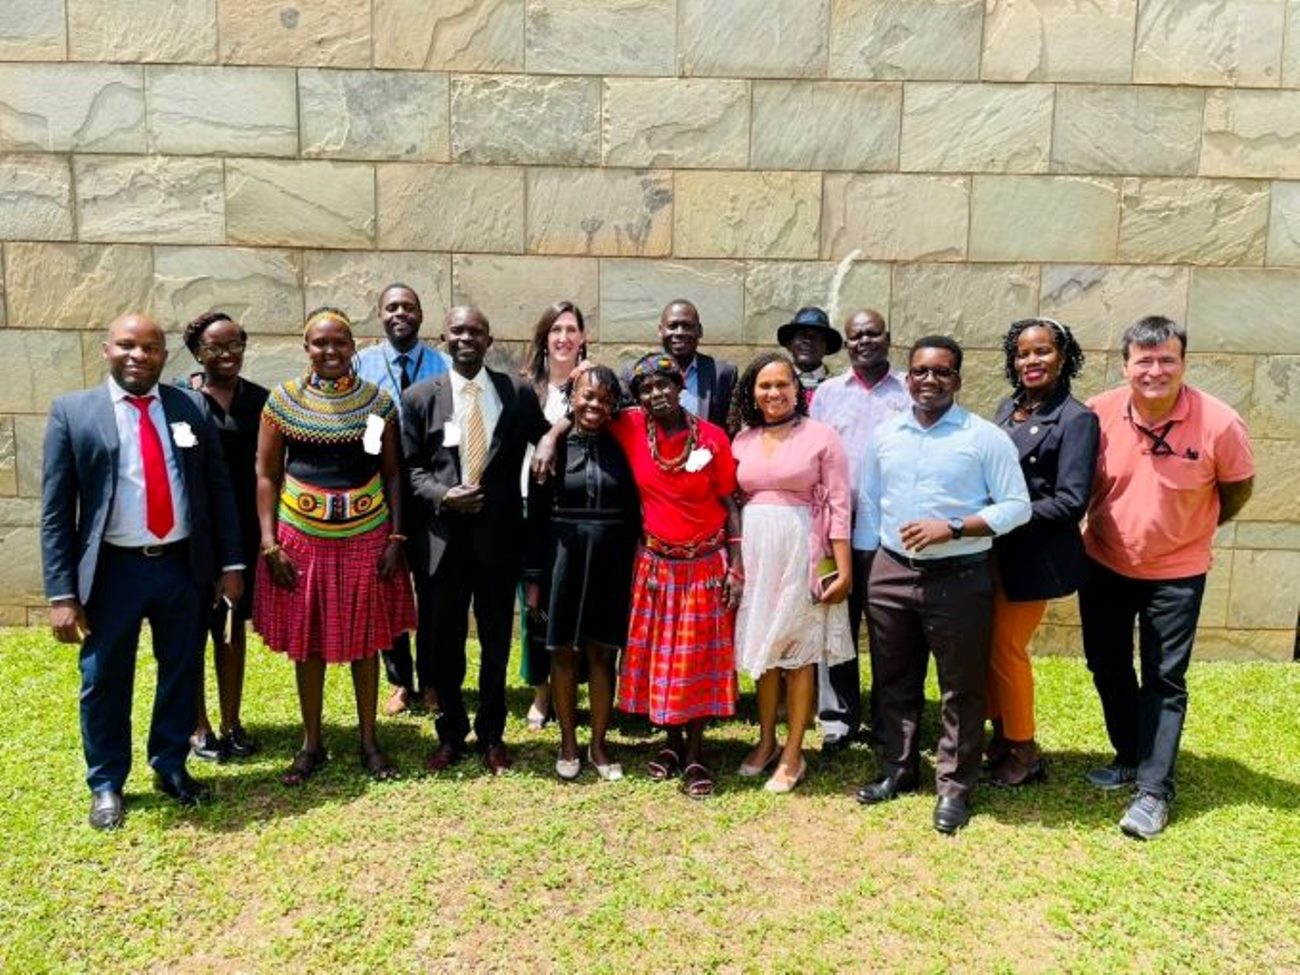 Participants join in a group photo after the The 2nd Diversity, Equity, Inclusion and Accessibility Kimeza engagement at the USAID Mission, Uganda on 30th January 2023. Photo: RAN. Makerere University School of Public Health, Kampala Uganda, East Africa.